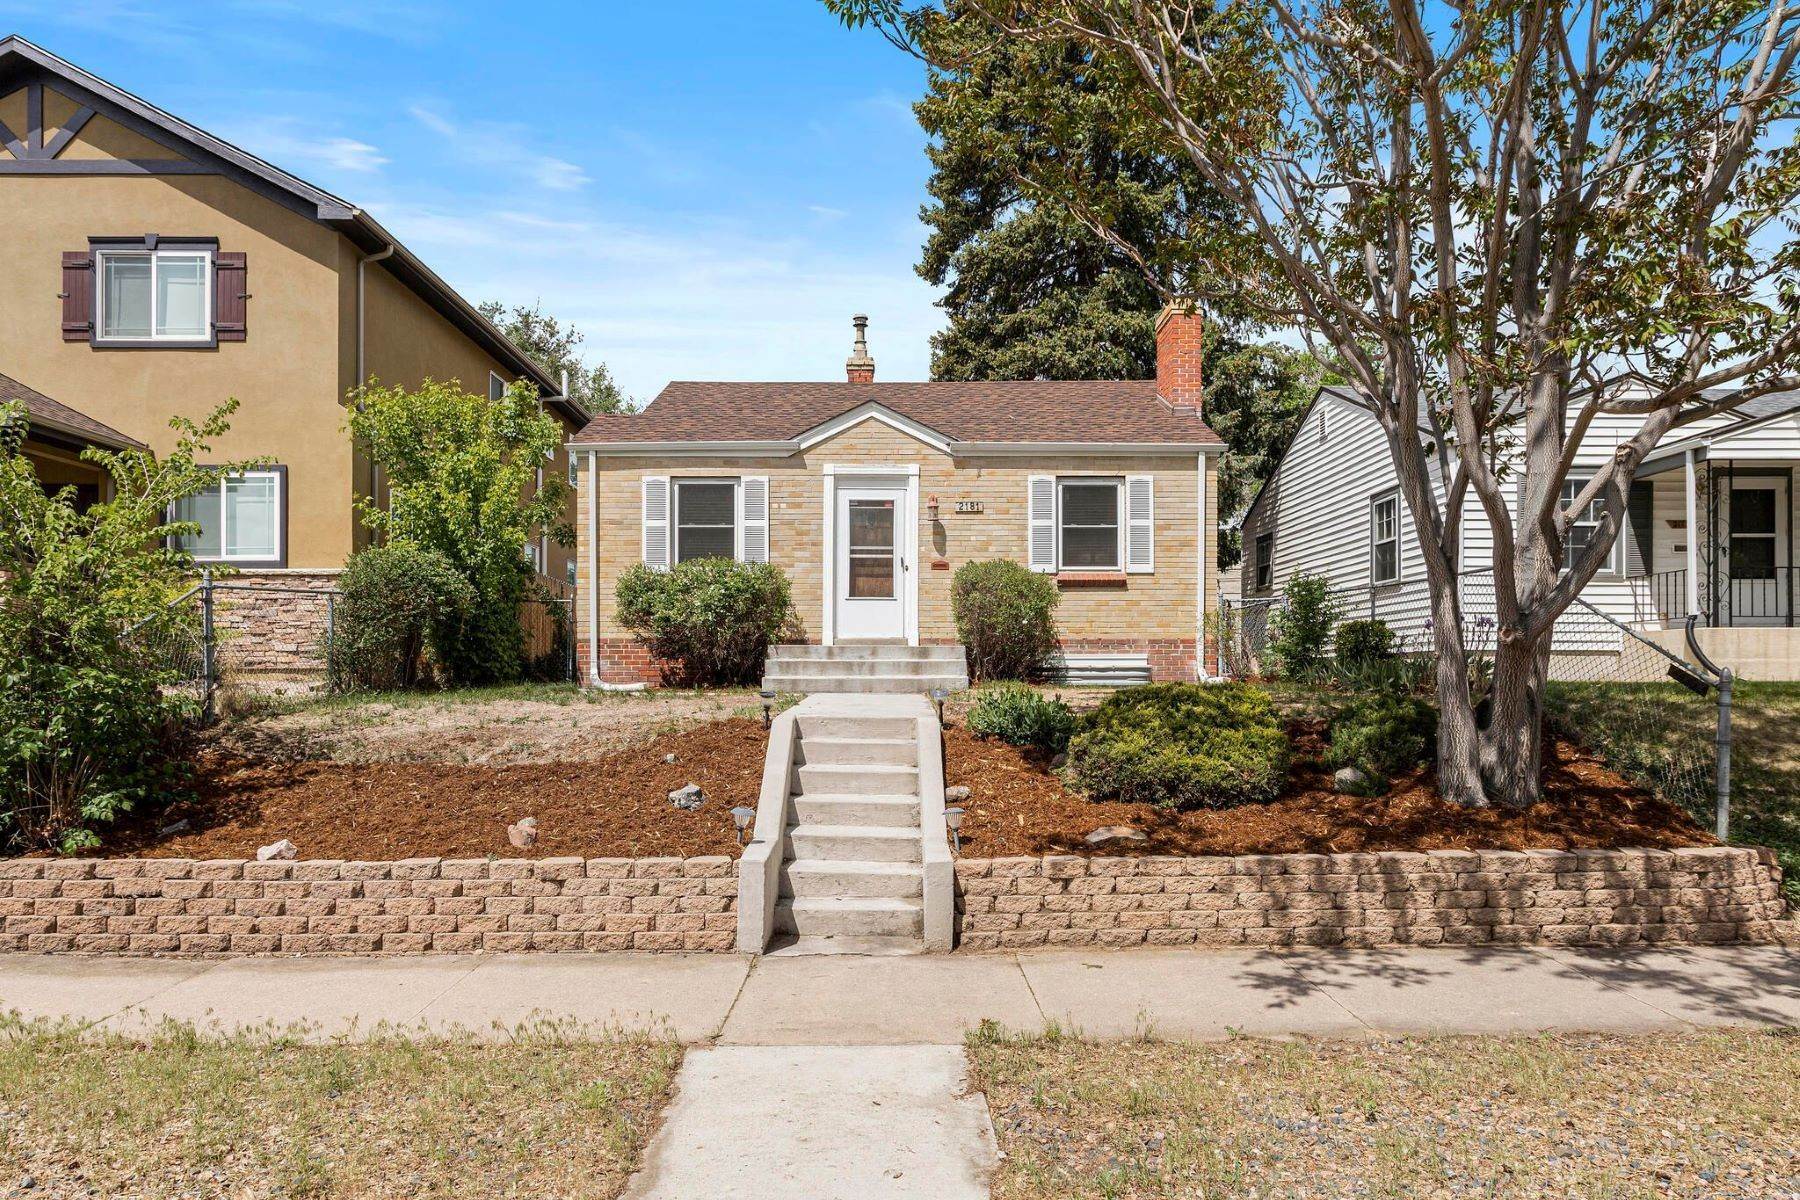 33. Single Family Homes for Active at 2181 S Lafayette Street, Denver, CO, 80210 2181 S Lafayette Street Denver, Colorado 80210 United States